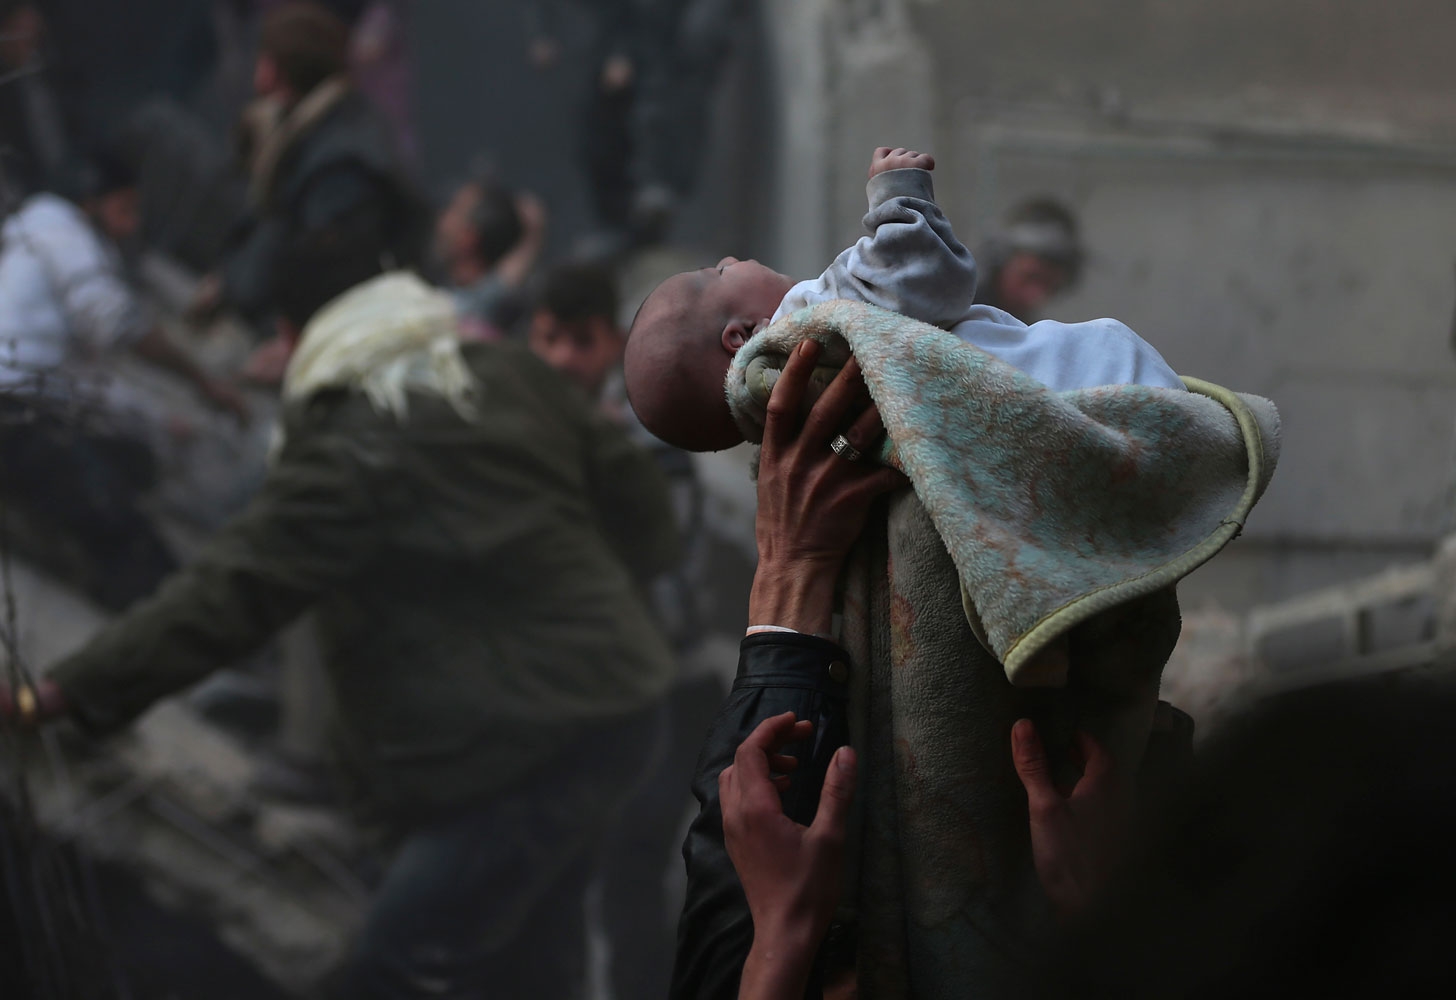 Men hold up a baby saved from under rubble, who survived what activists say was an airstrike by forces loyal to Syrian President Bashar al-Assad in the Duma neighbourhood of Damascus, Jan. 7, 2014. (Bassam Khabieh—Reuters)